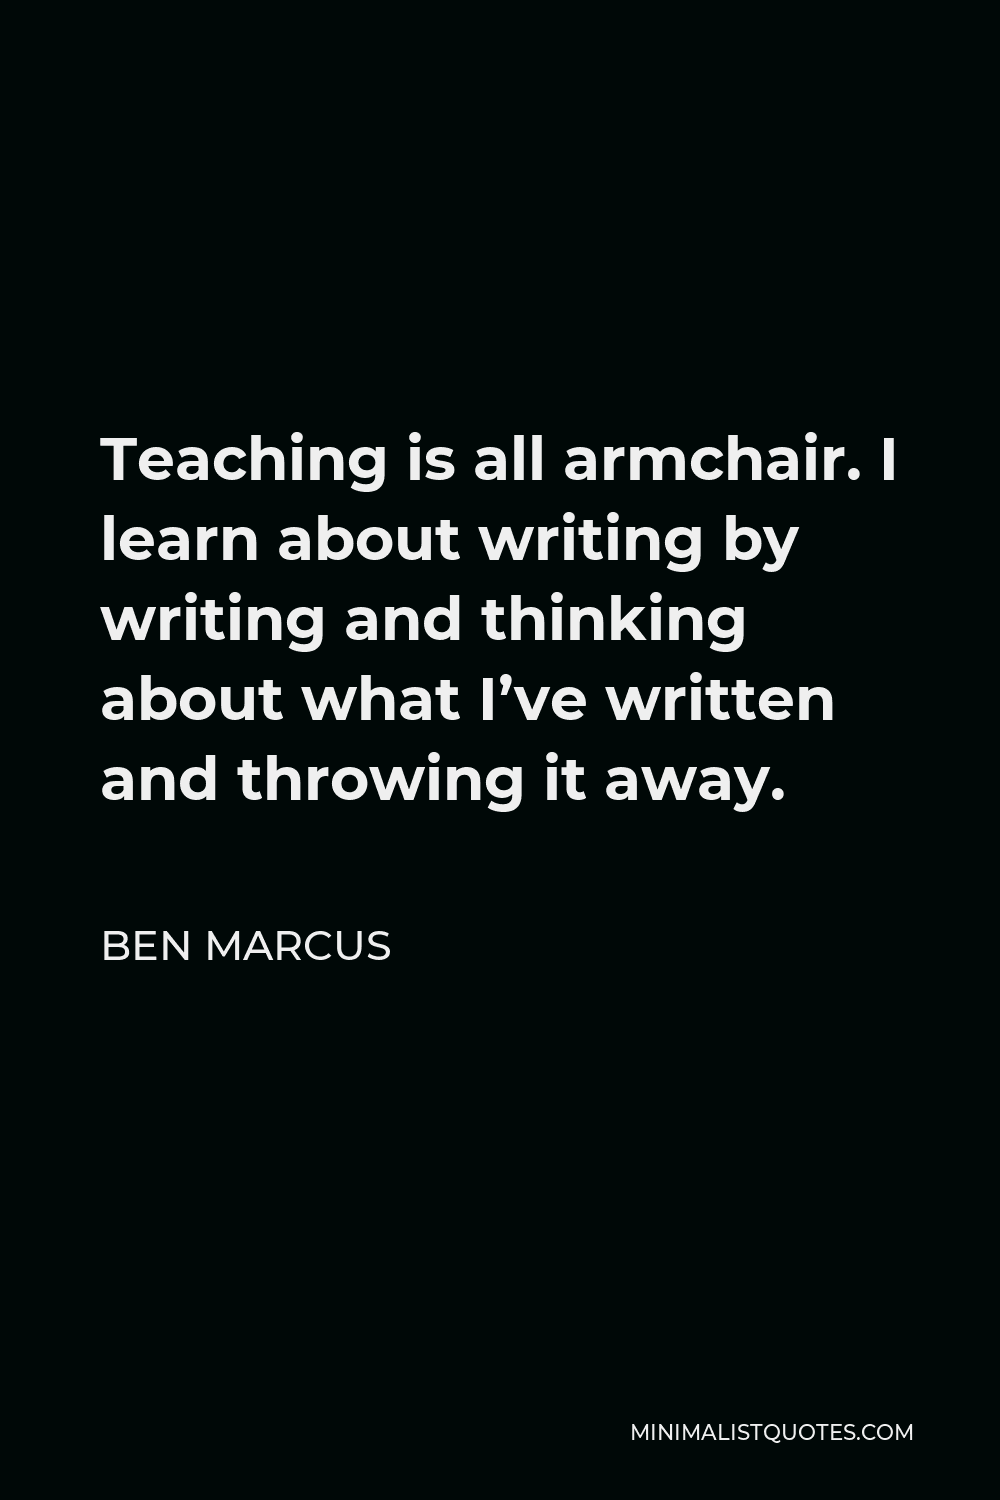 Ben Marcus Quote - Teaching is all armchair. I learn about writing by writing and thinking about what I’ve written and throwing it away.